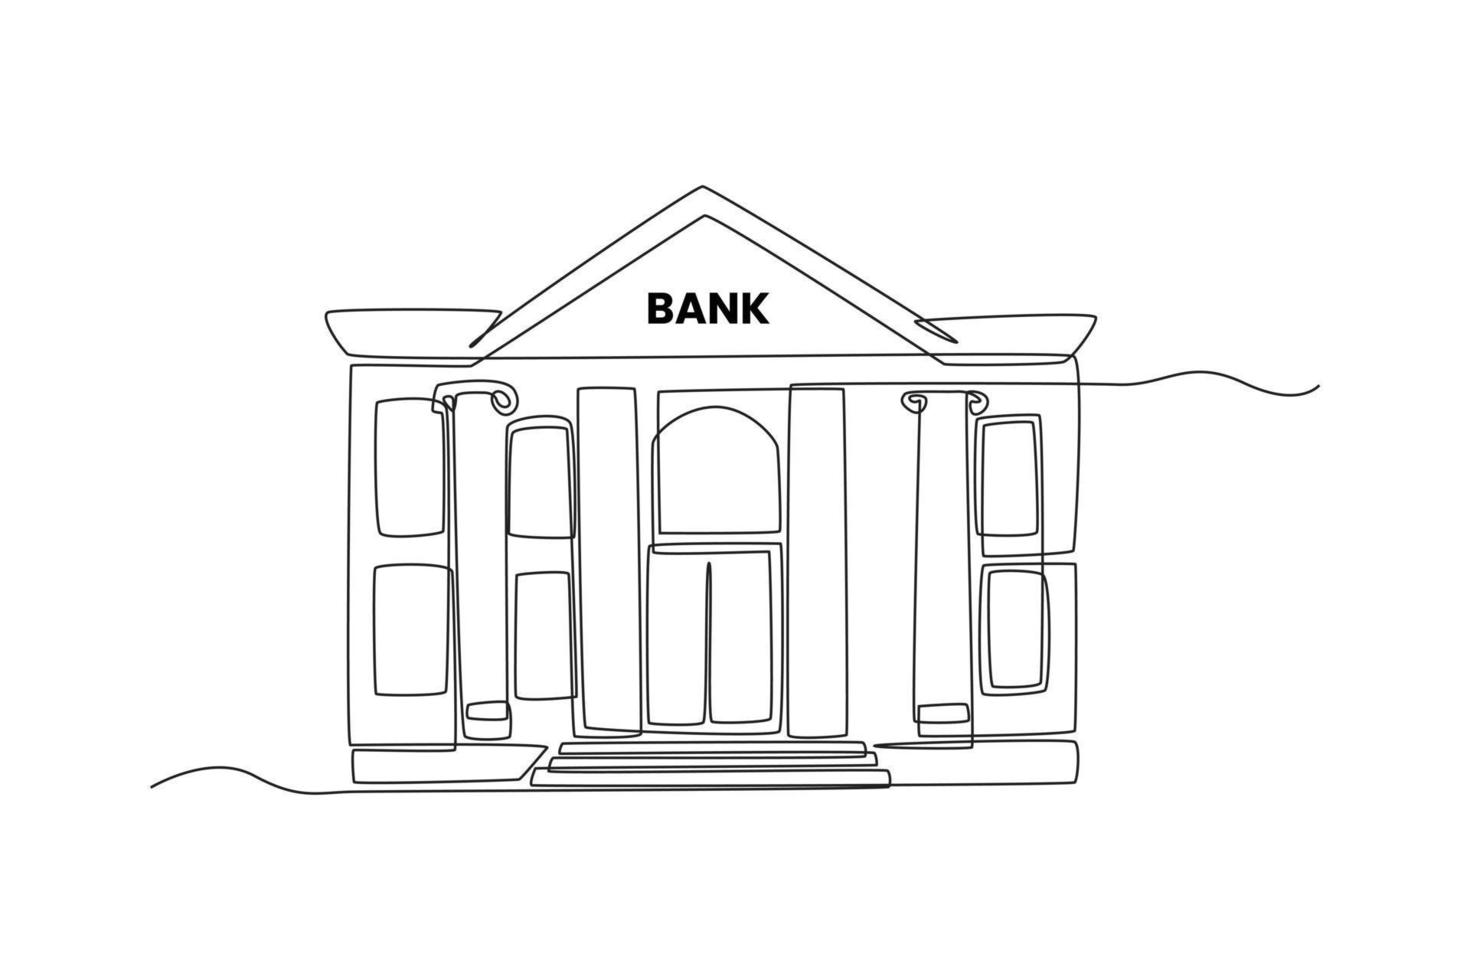 Continuous one line drawing bank building. Building and office concept. Single line draw design vector graphic illustration.